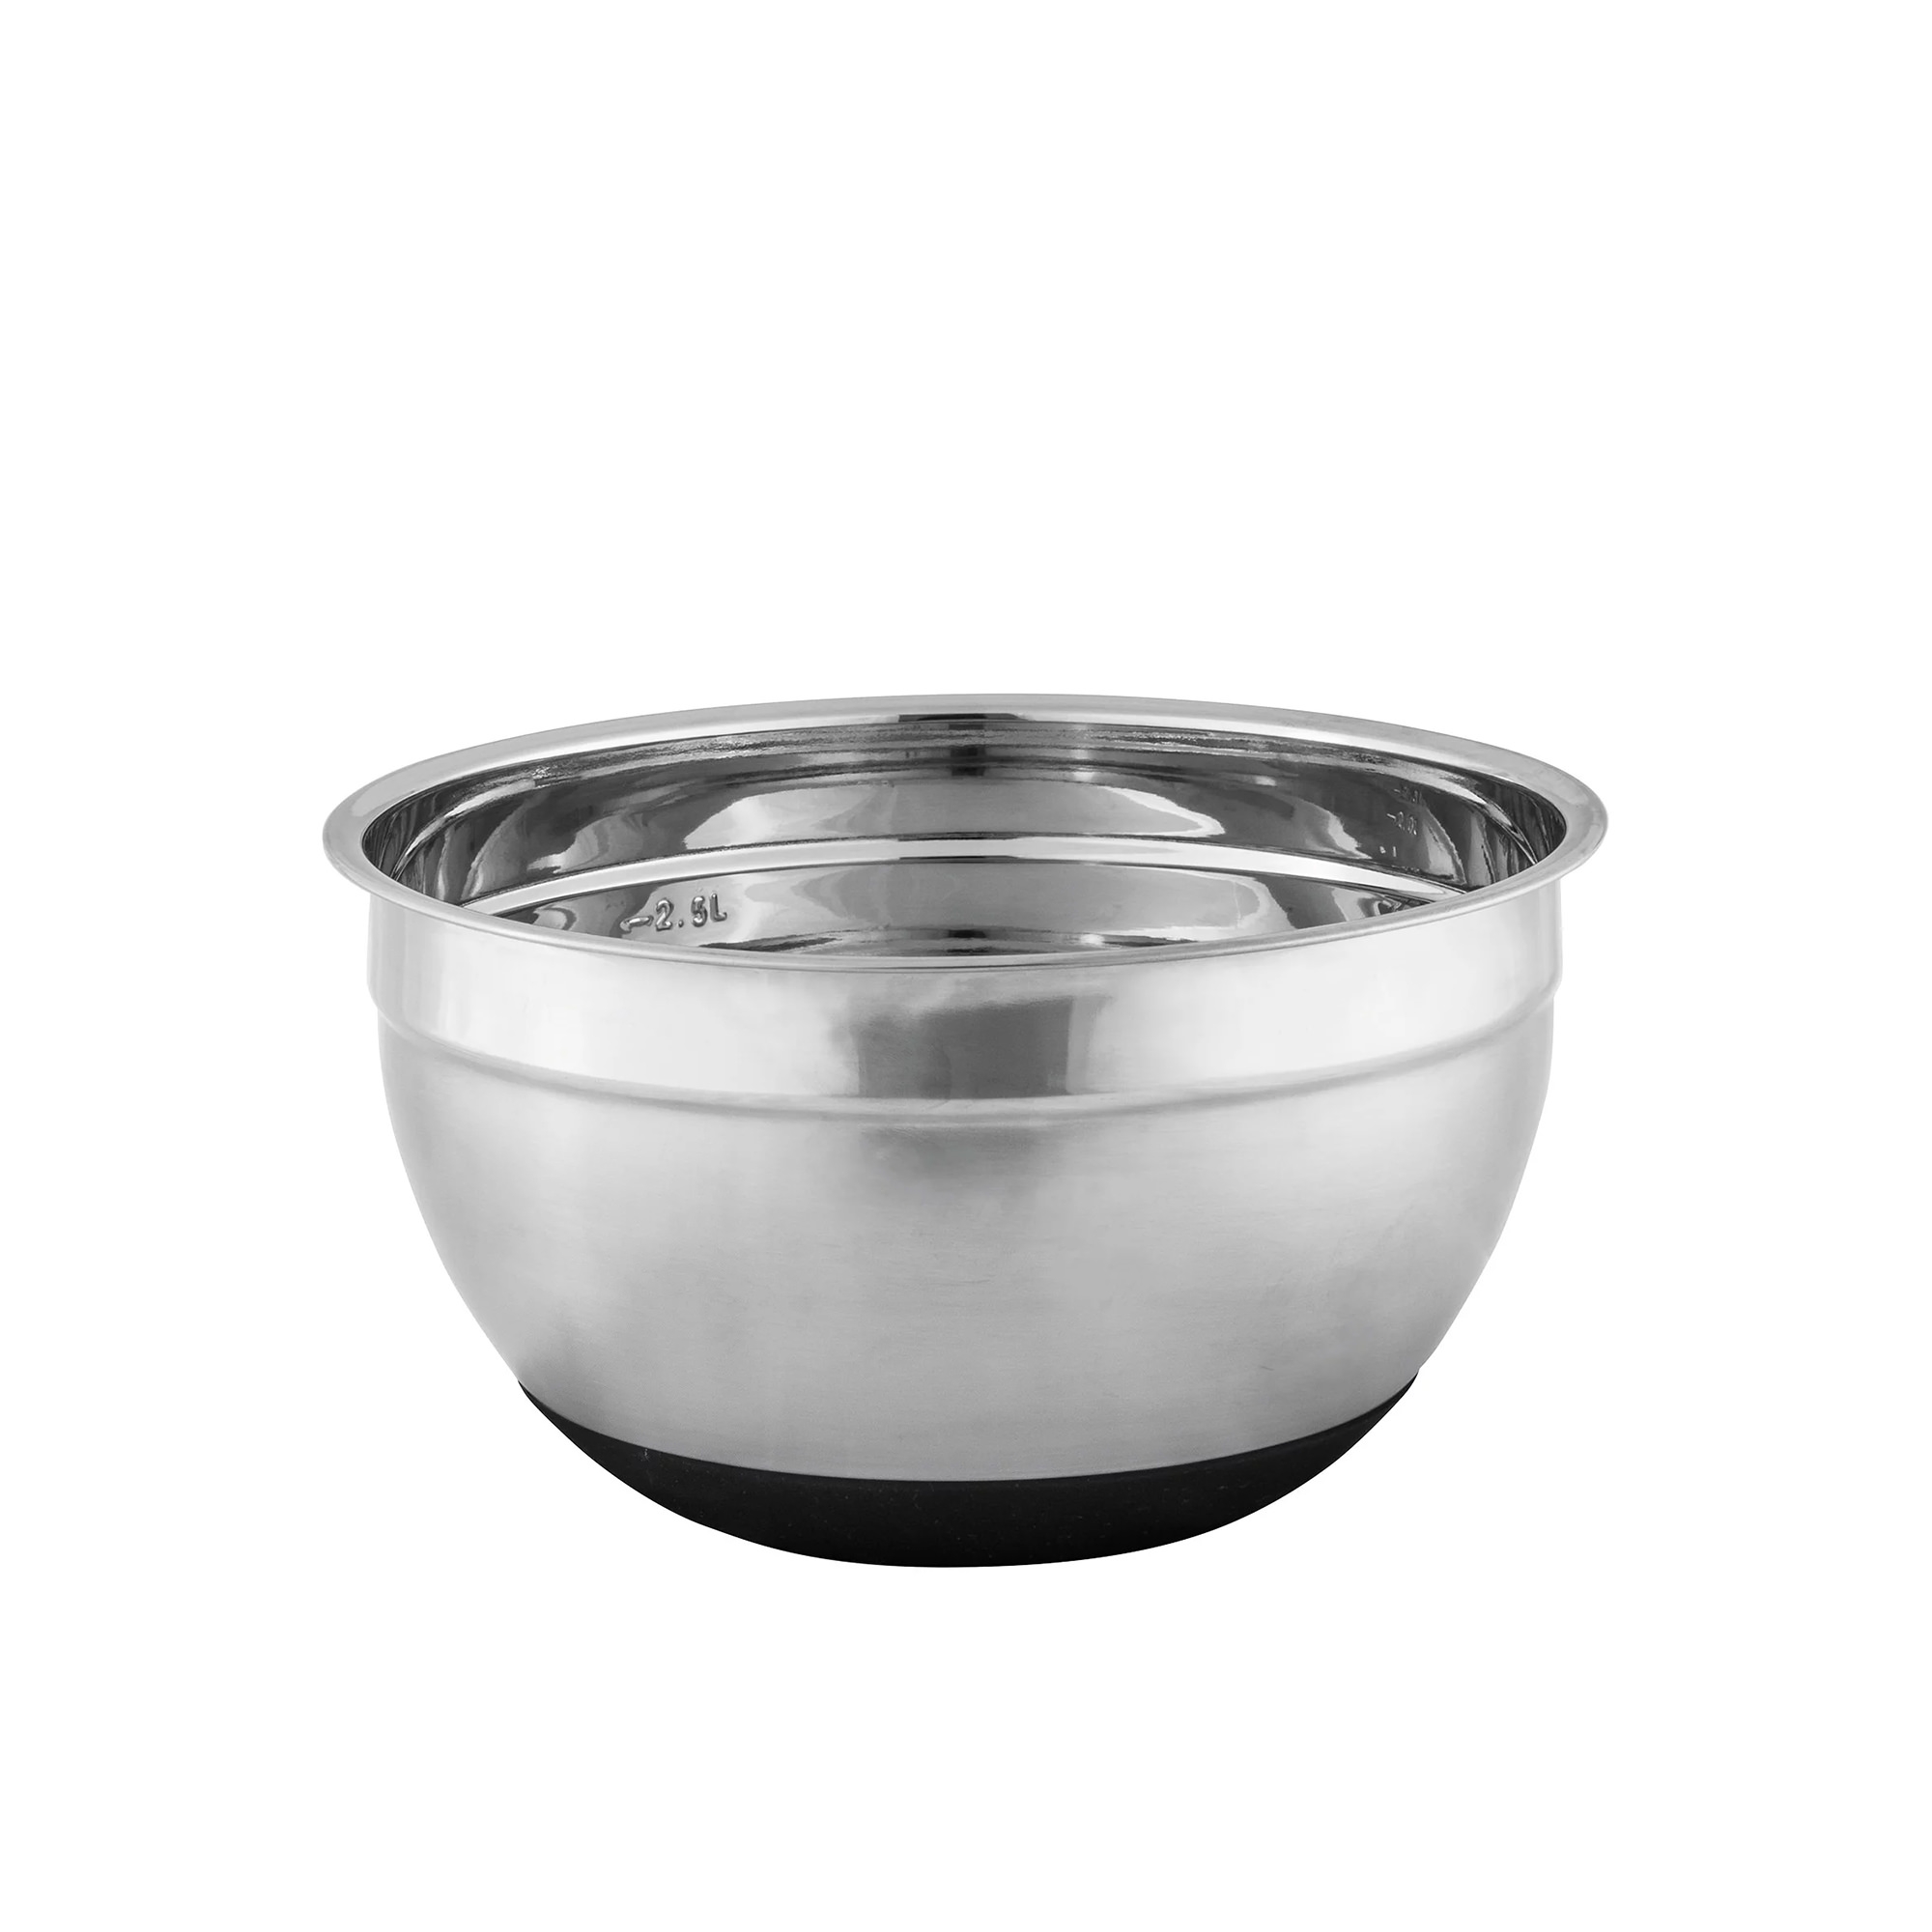 Avanti Stainless Steel Mixing Bowl with Silicone Bottom 22cm - 2.5L Image 1